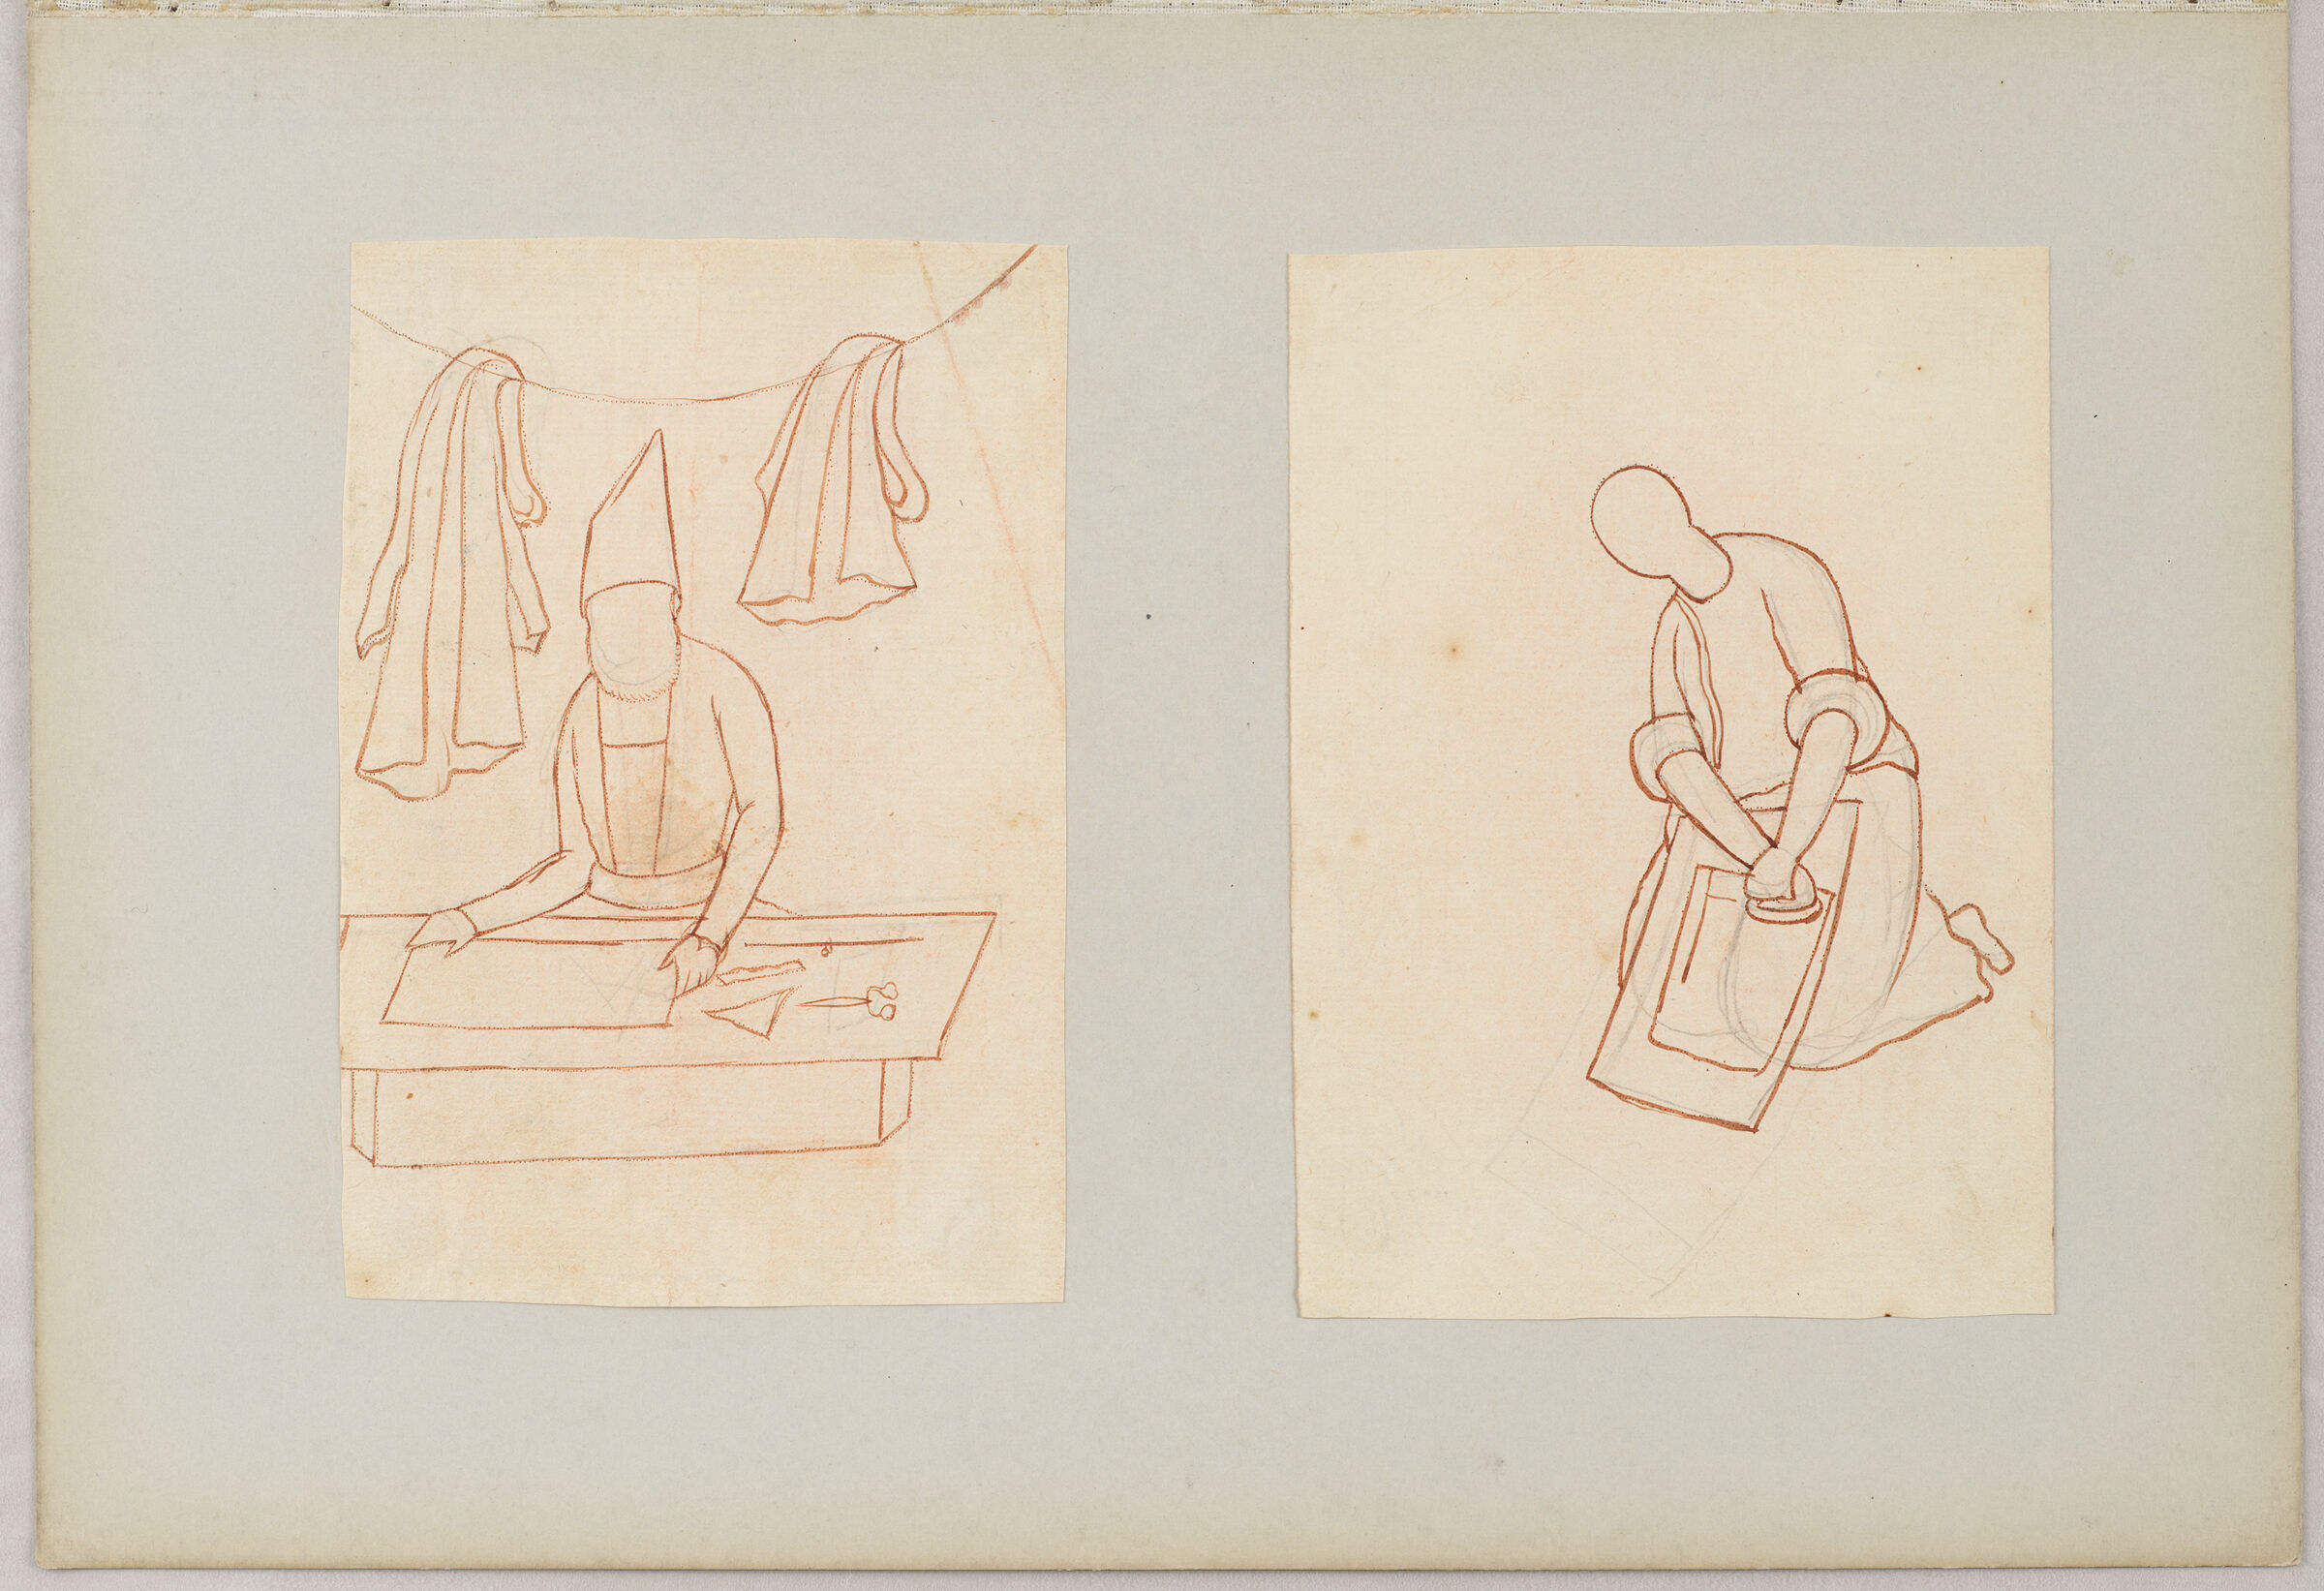 Folio 15 From An Album Of Drawings And Paintings: Two Drawings Of Workmen: Tailor And Man With Washboard (Recto); Blank Page (Verso)